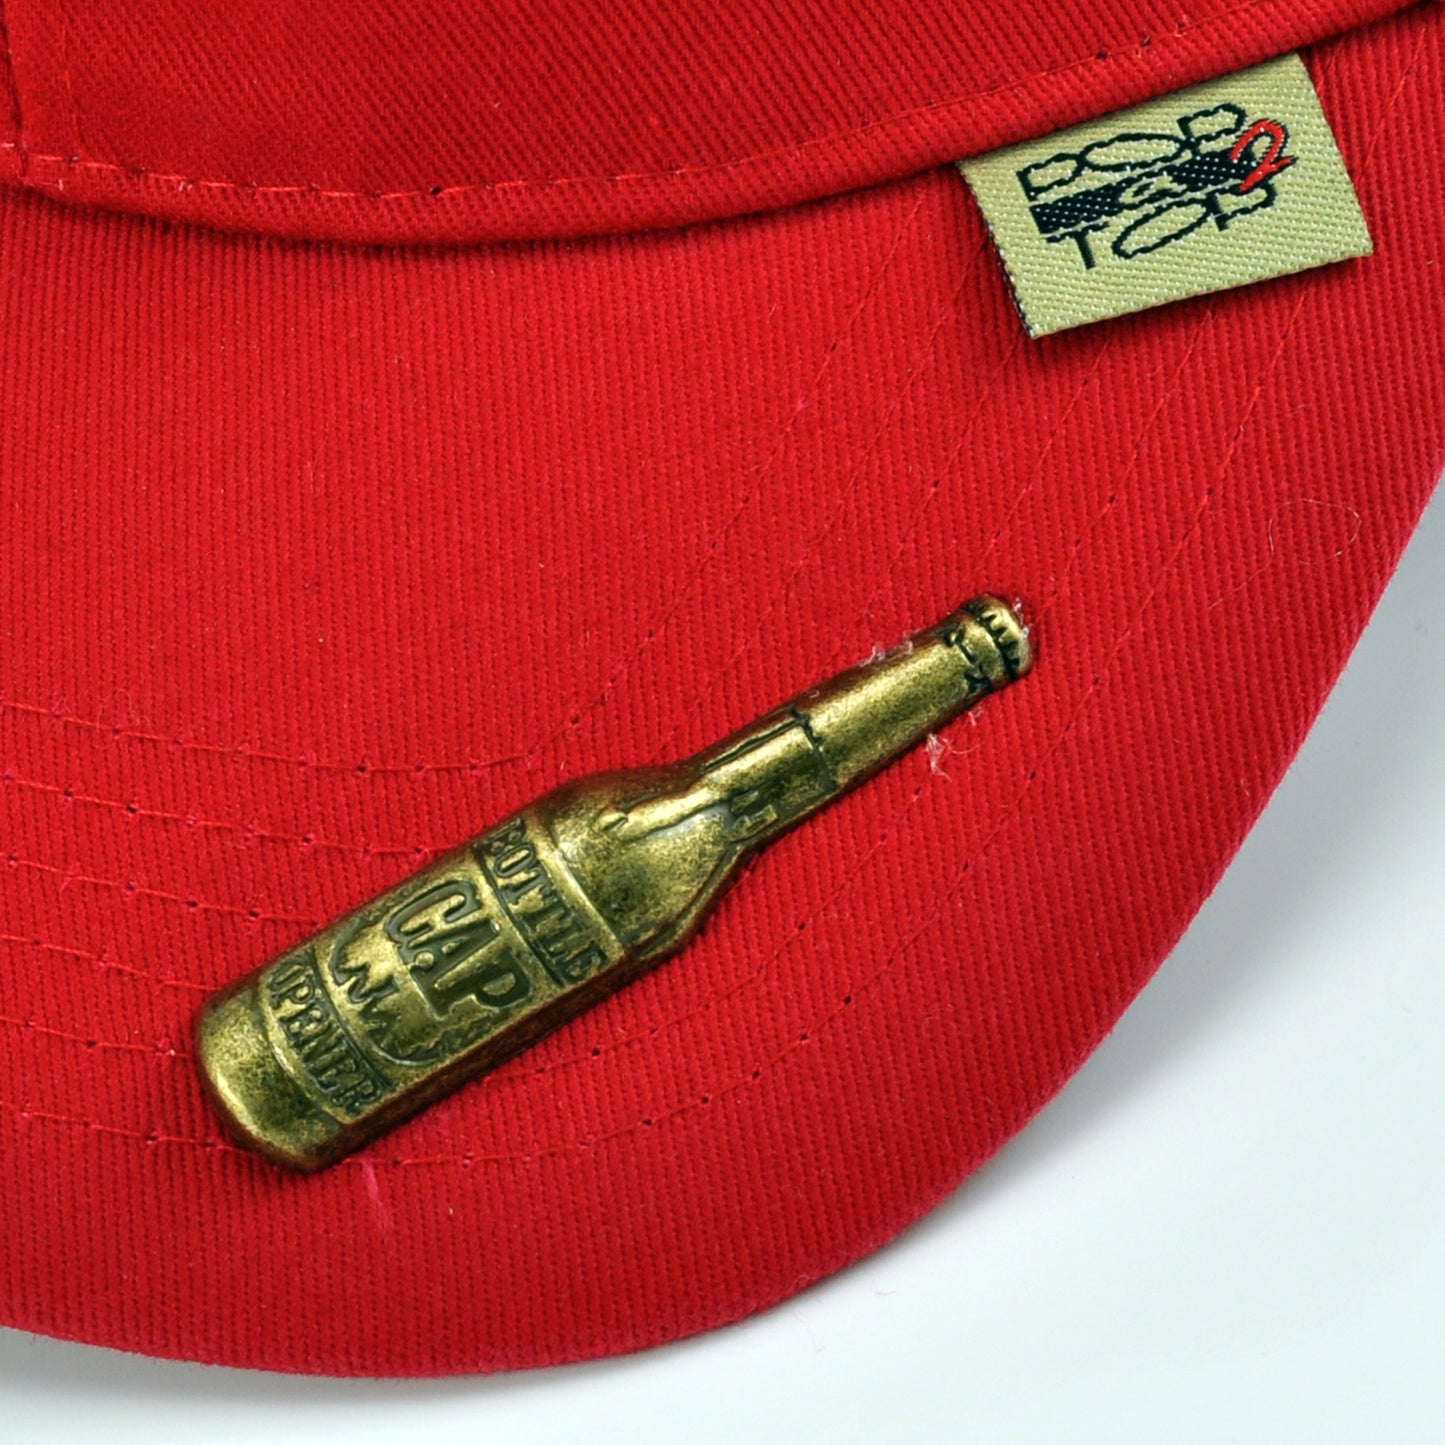 POP-A-TOP Snapback Hat with Bottle Opener in Red